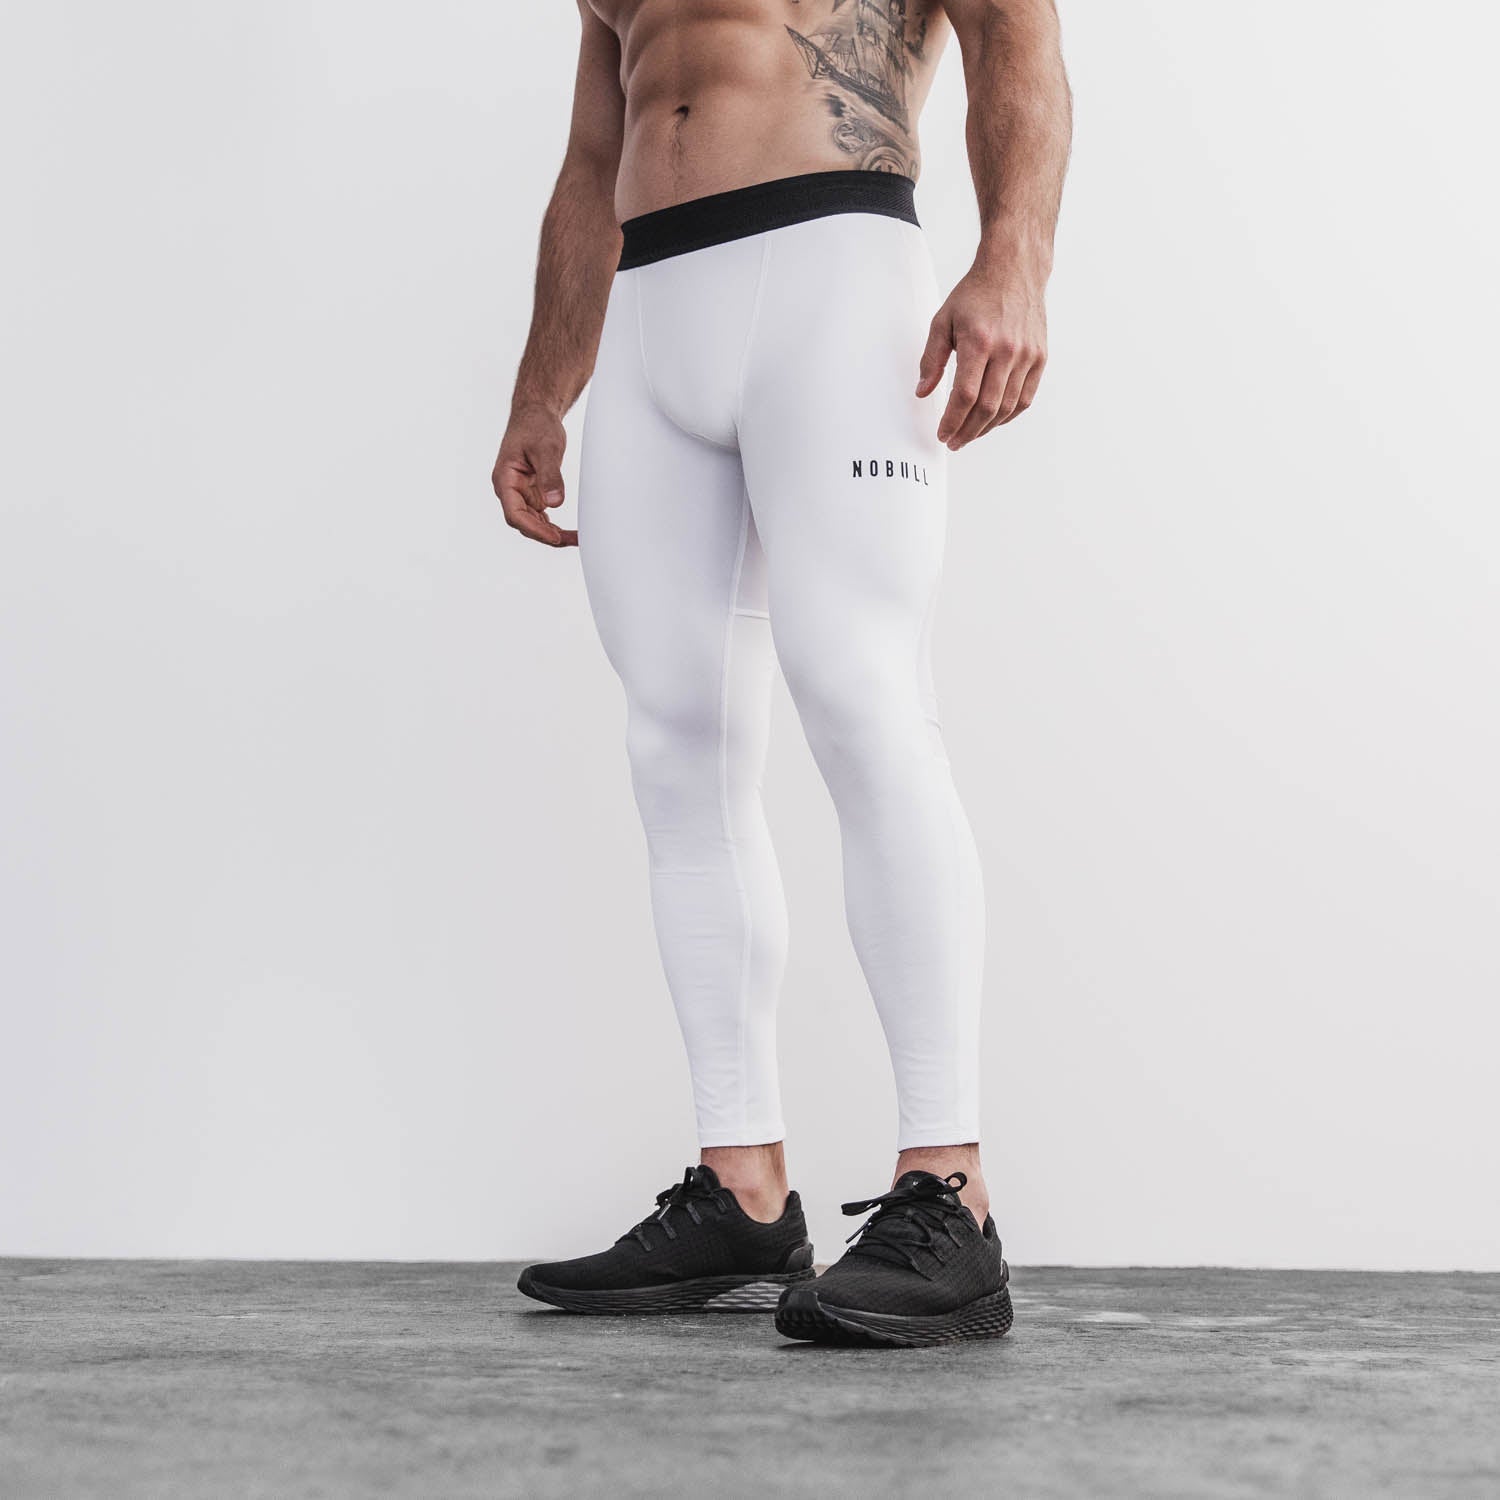 MEN'S MIDWEIGHT COMPRESSION TIGHT 27, WHITE